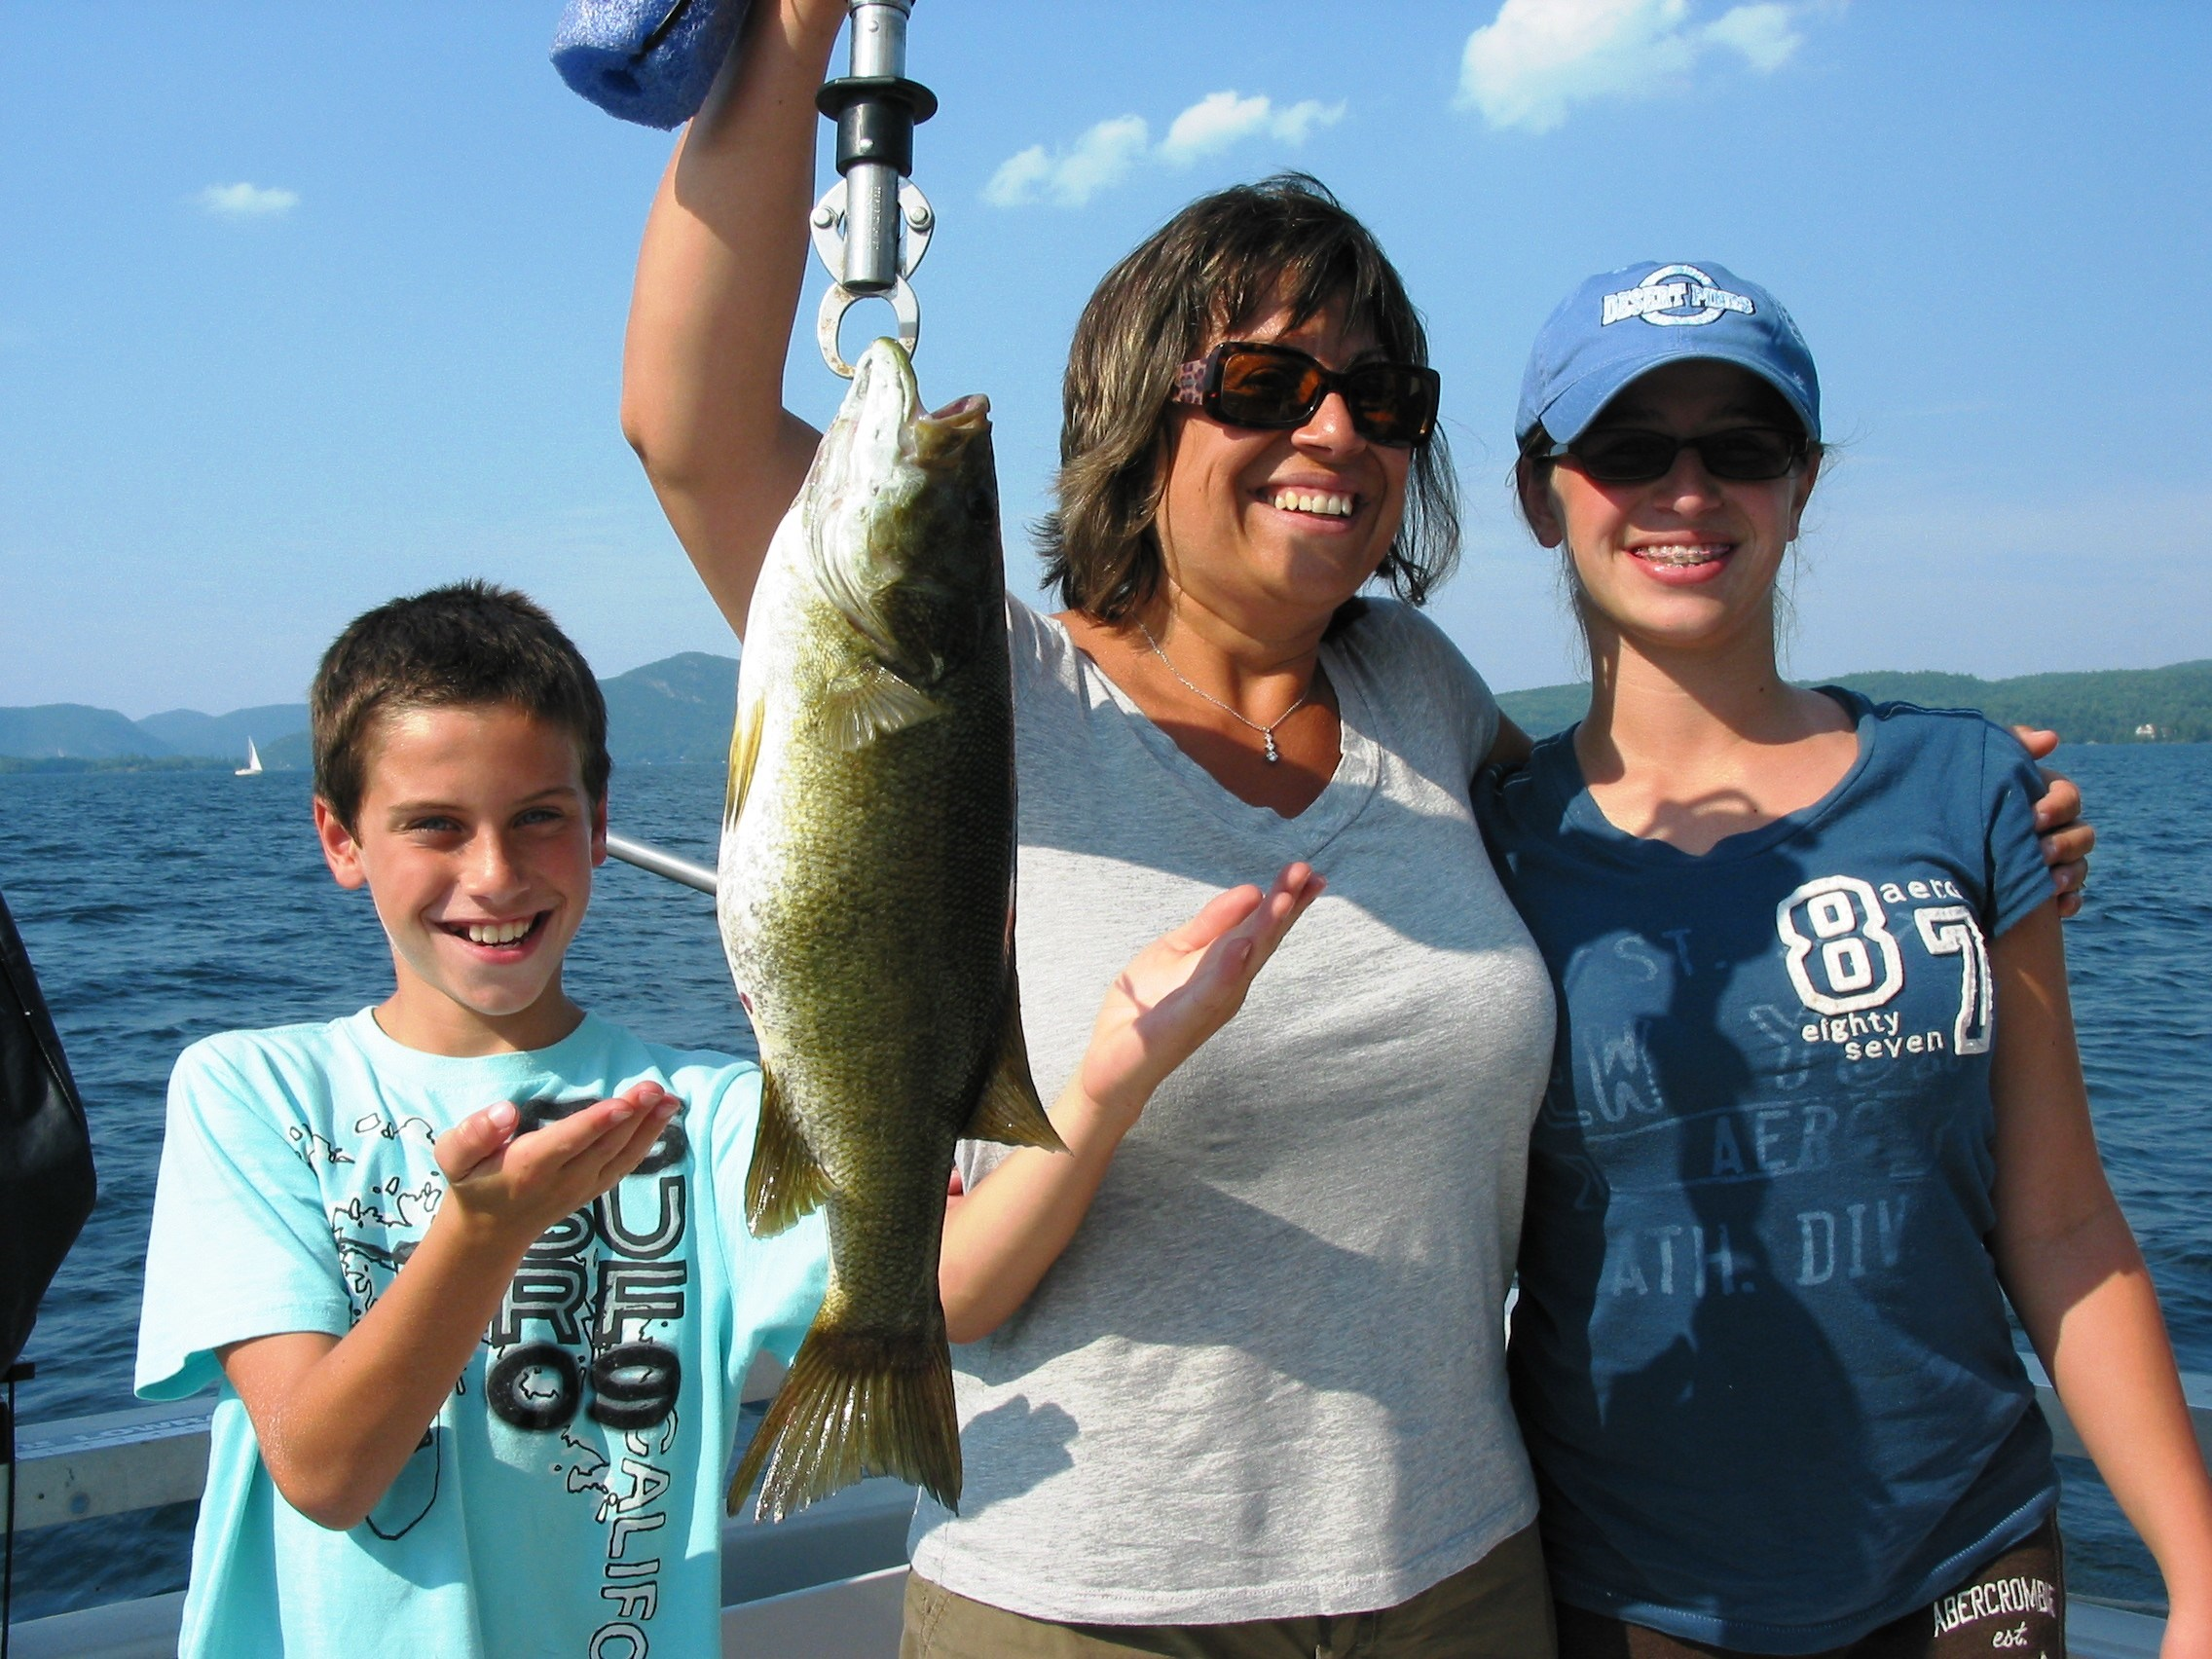 Bass fishing on Lake George provides a great family outing. (Photo courtesy of Justy Joe Charters)